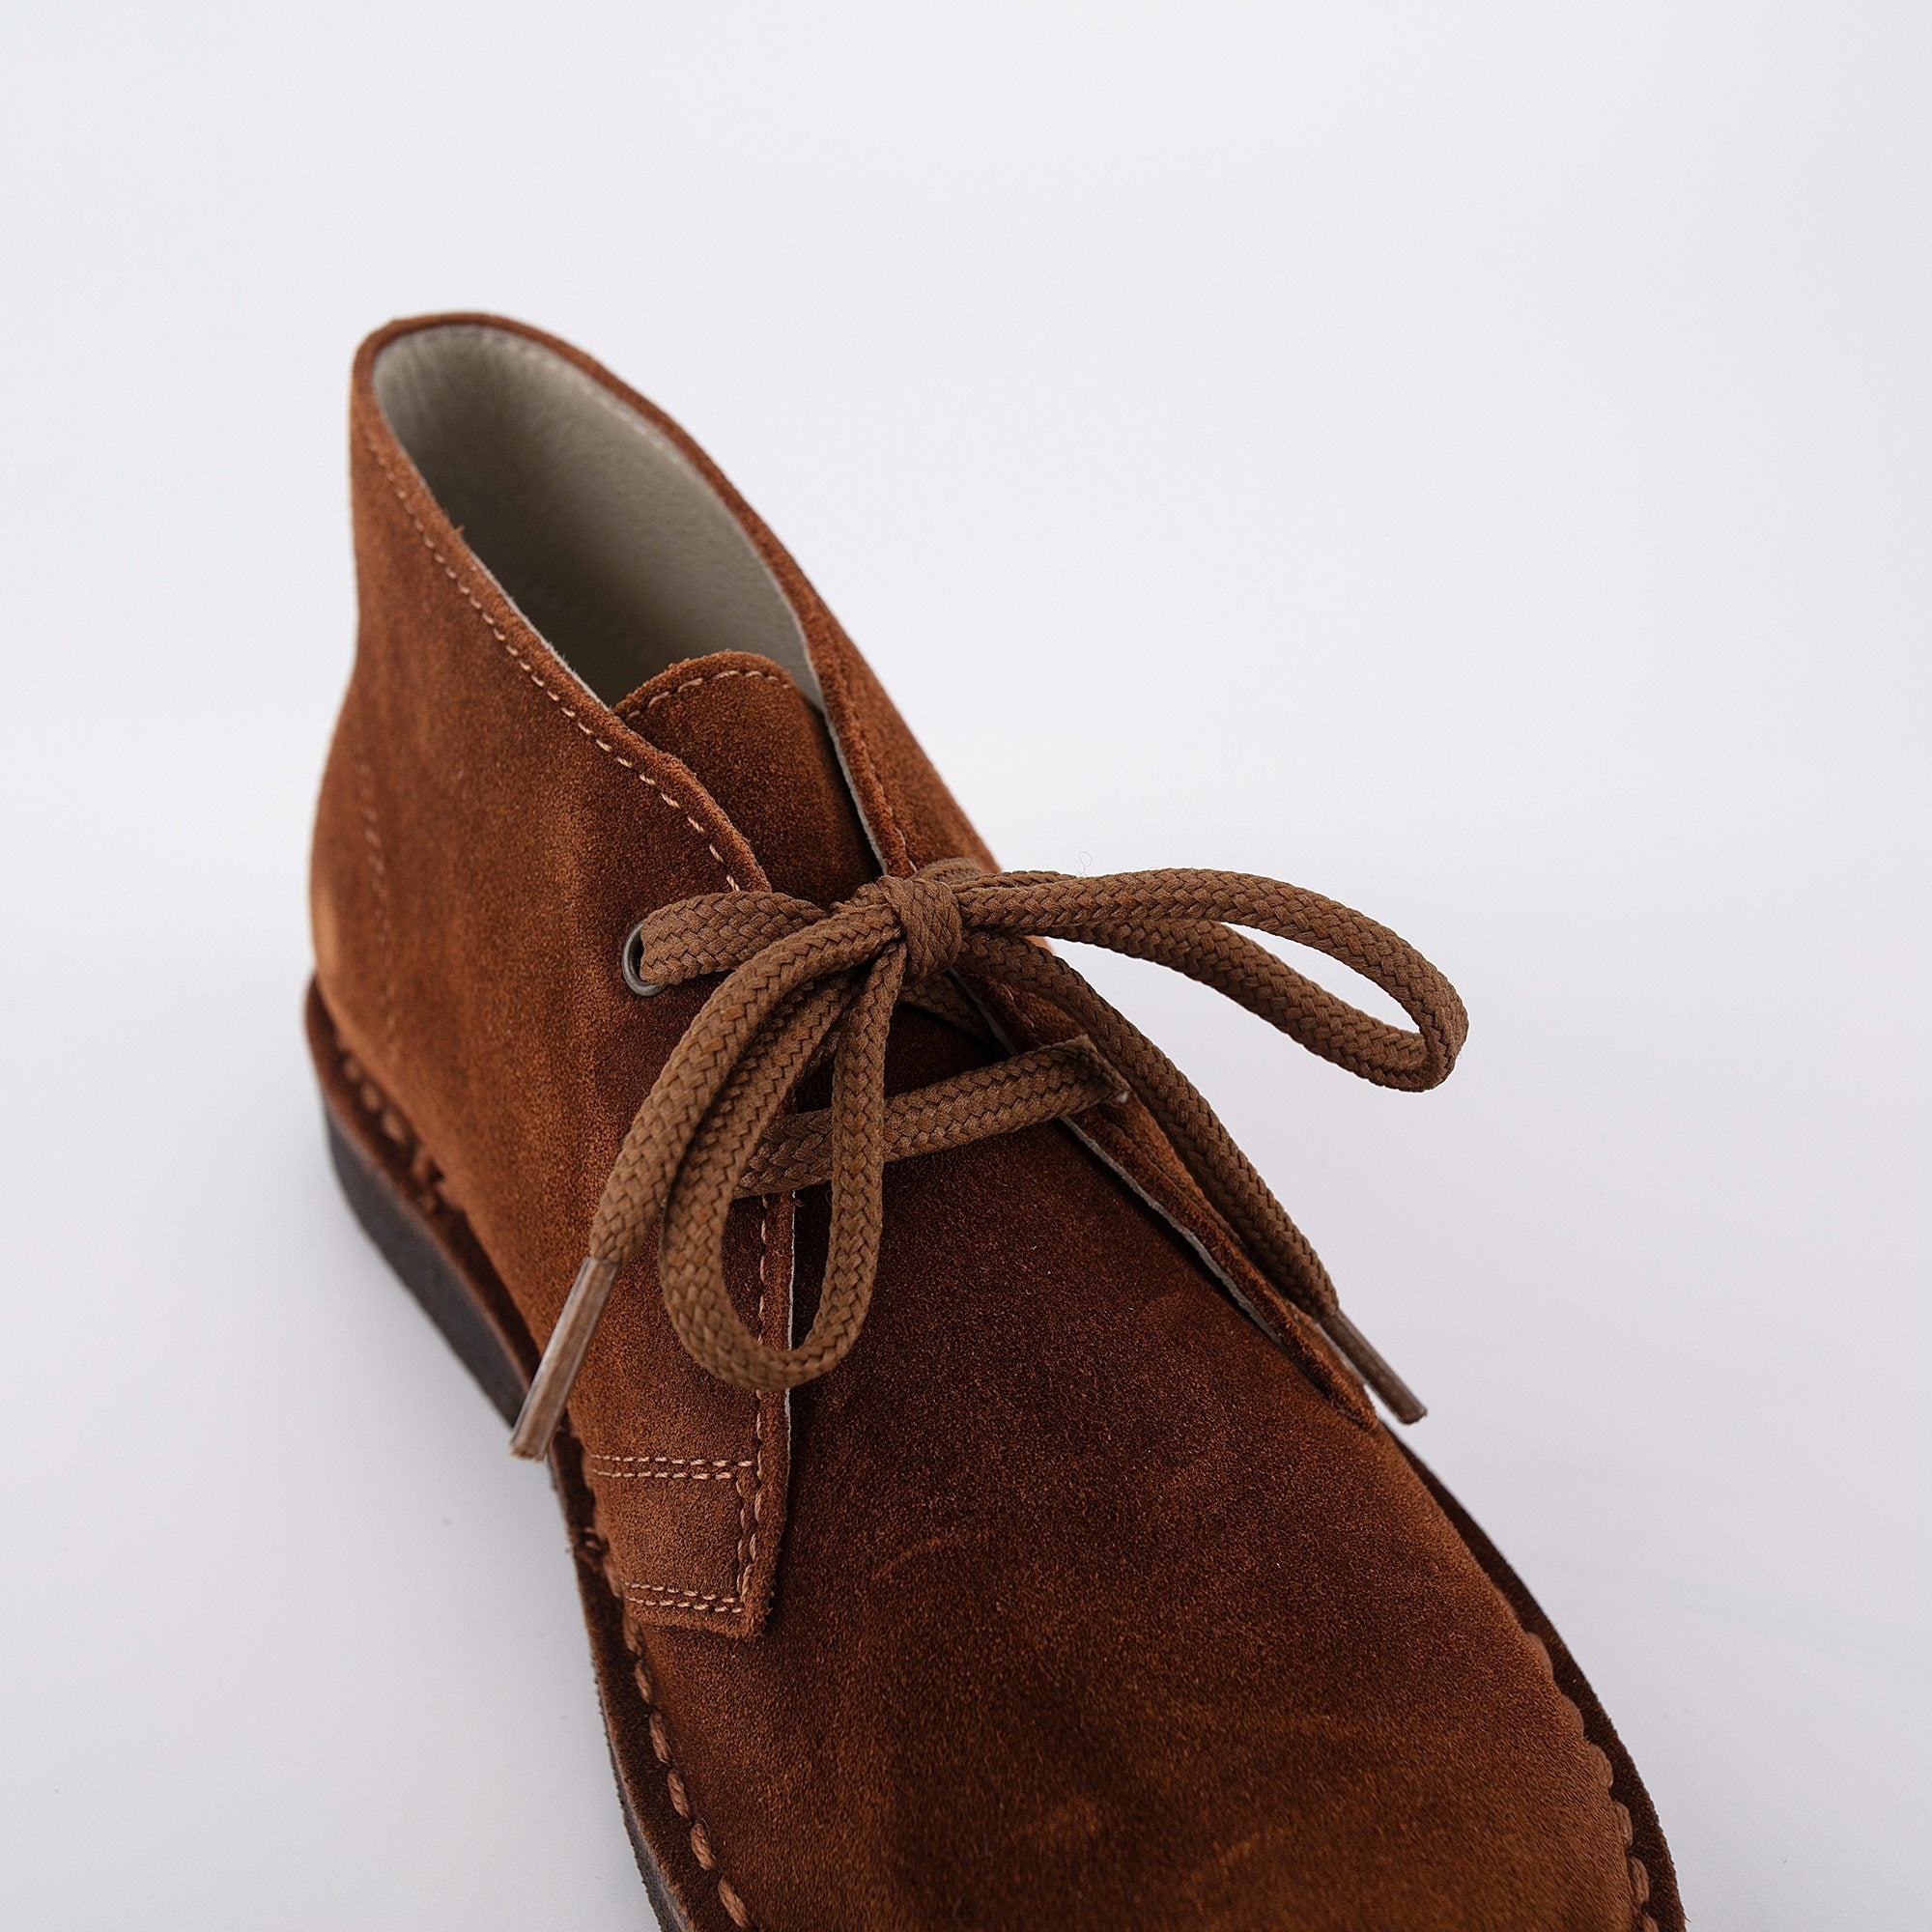 Boys & Girls Brown Leather Shoes